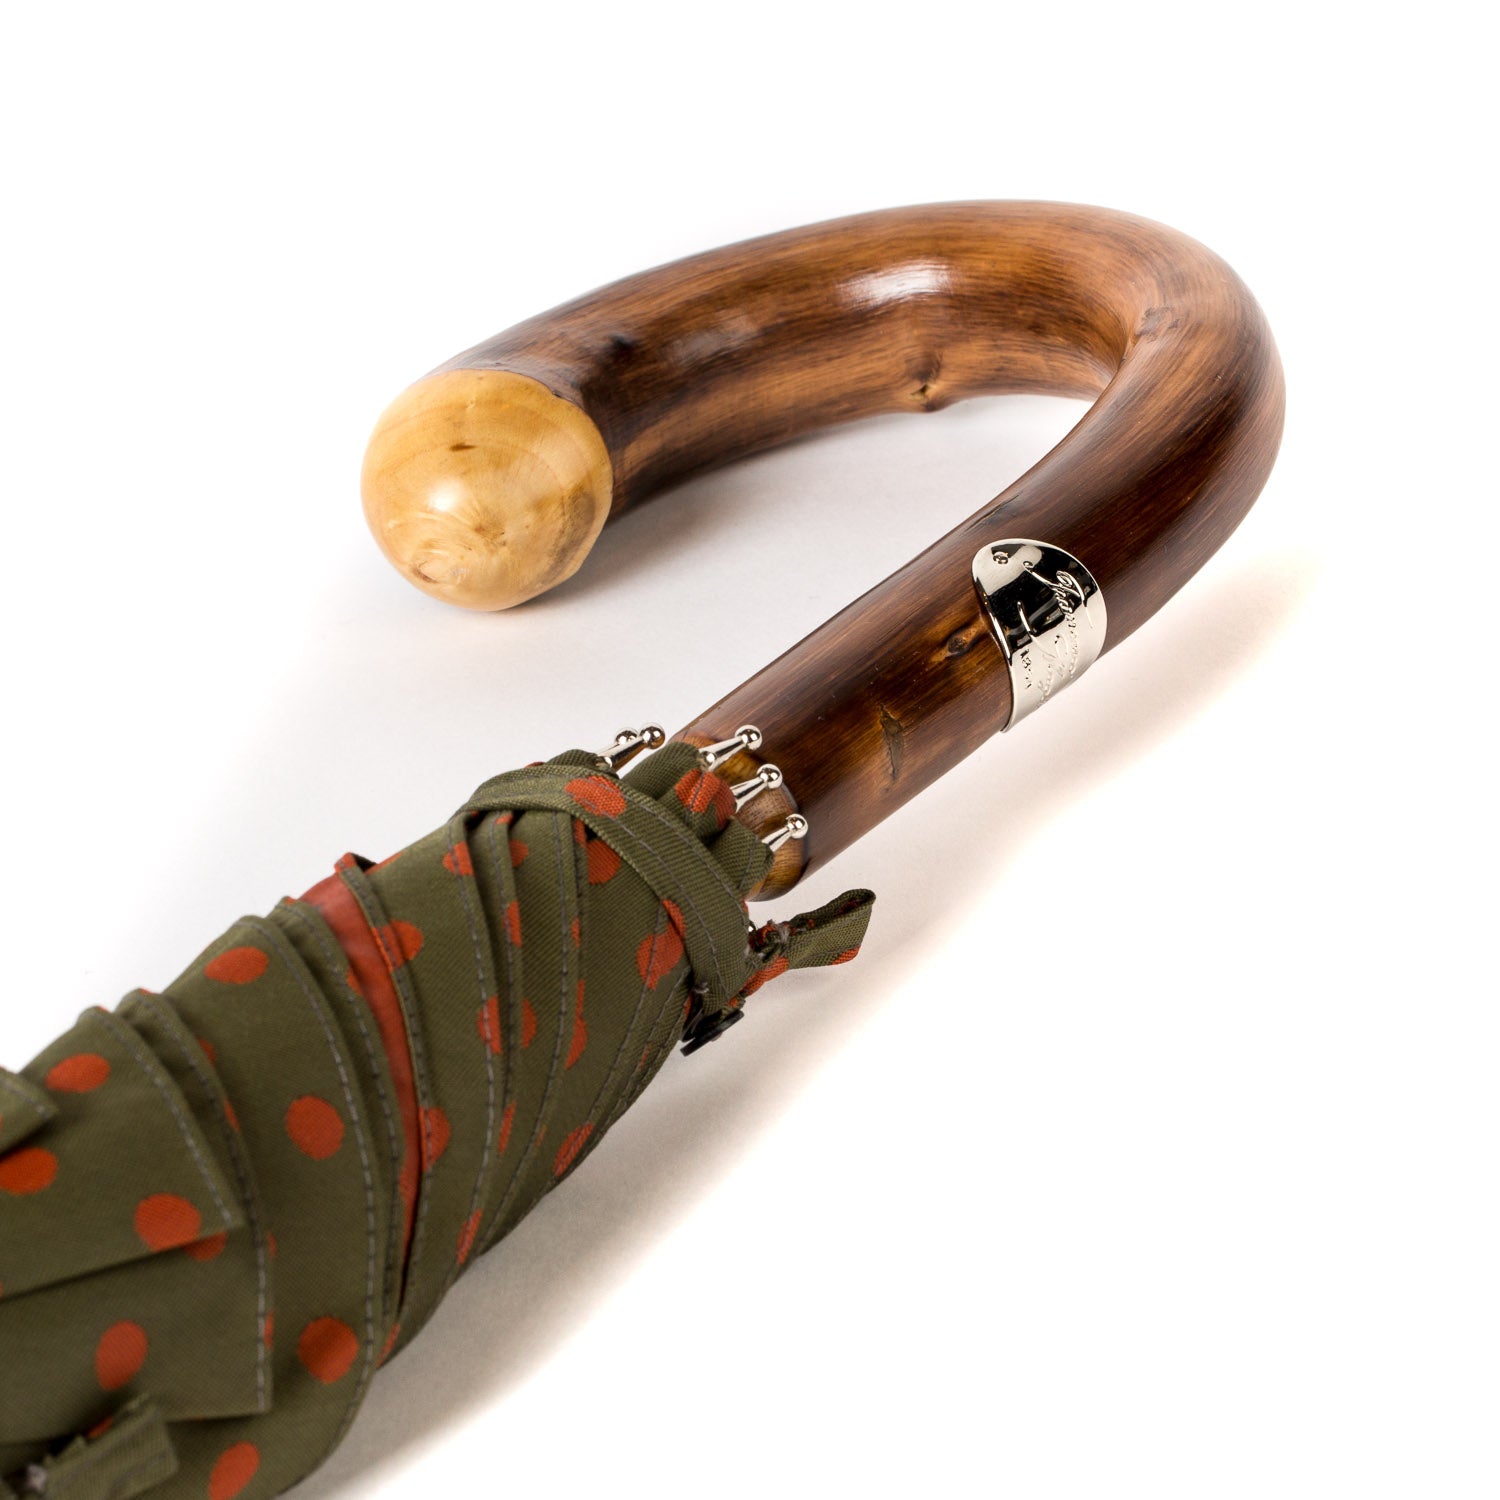 Olive-green umbrella with rust-red dots and handle made of chestnut wood –  Michael Jondral